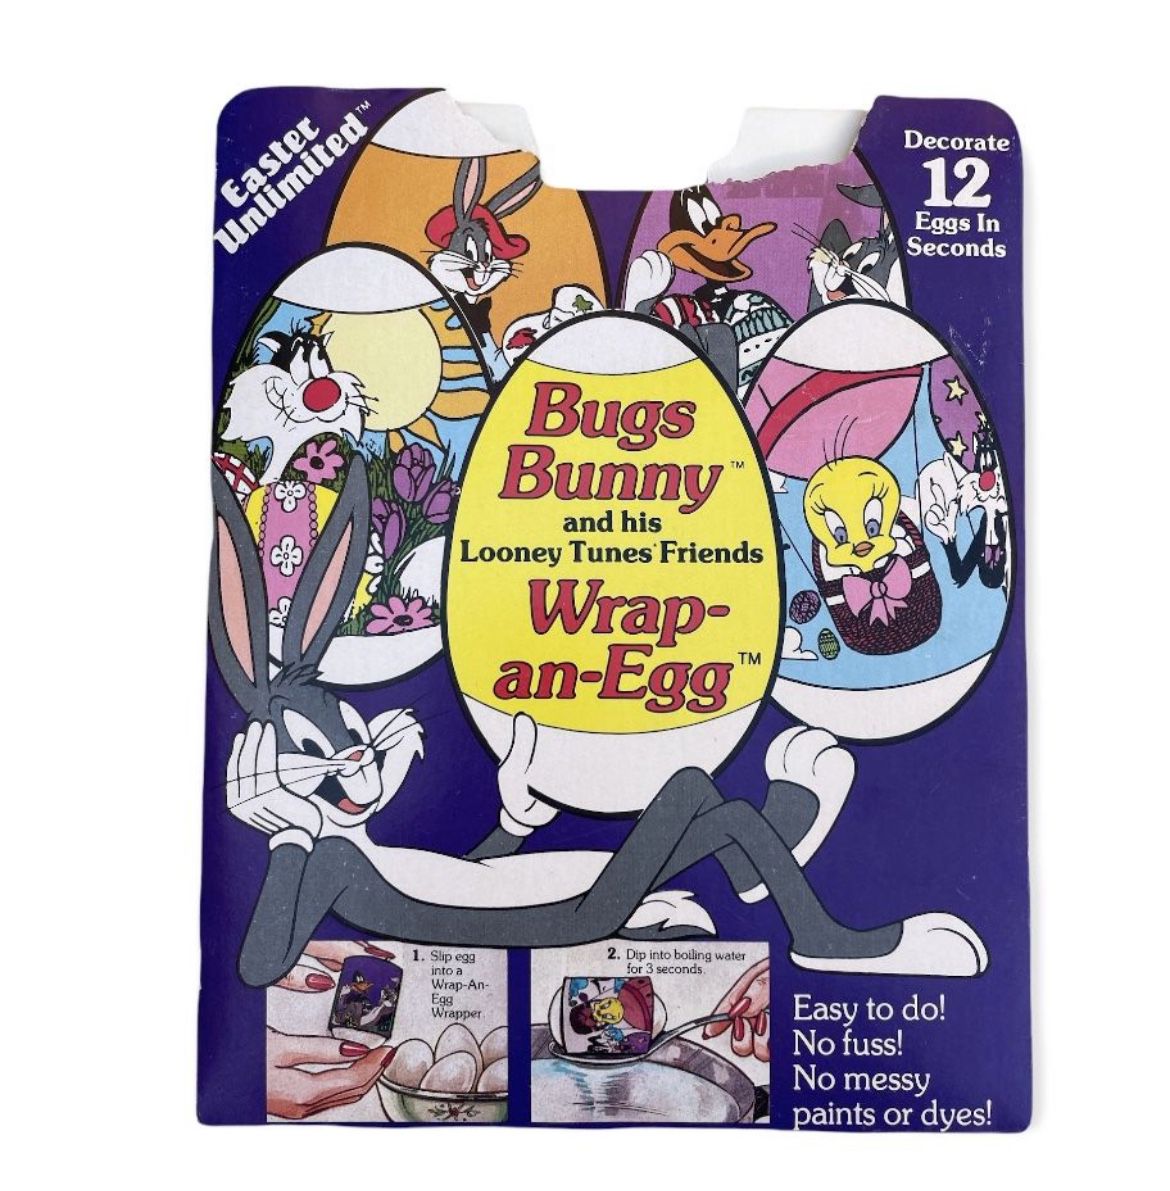 Vintage 1984 - Looney Tunes Bugs Bunny Sylvester The Cat Tweety Bird - Easter - Wrap-an-egg Decoration Set